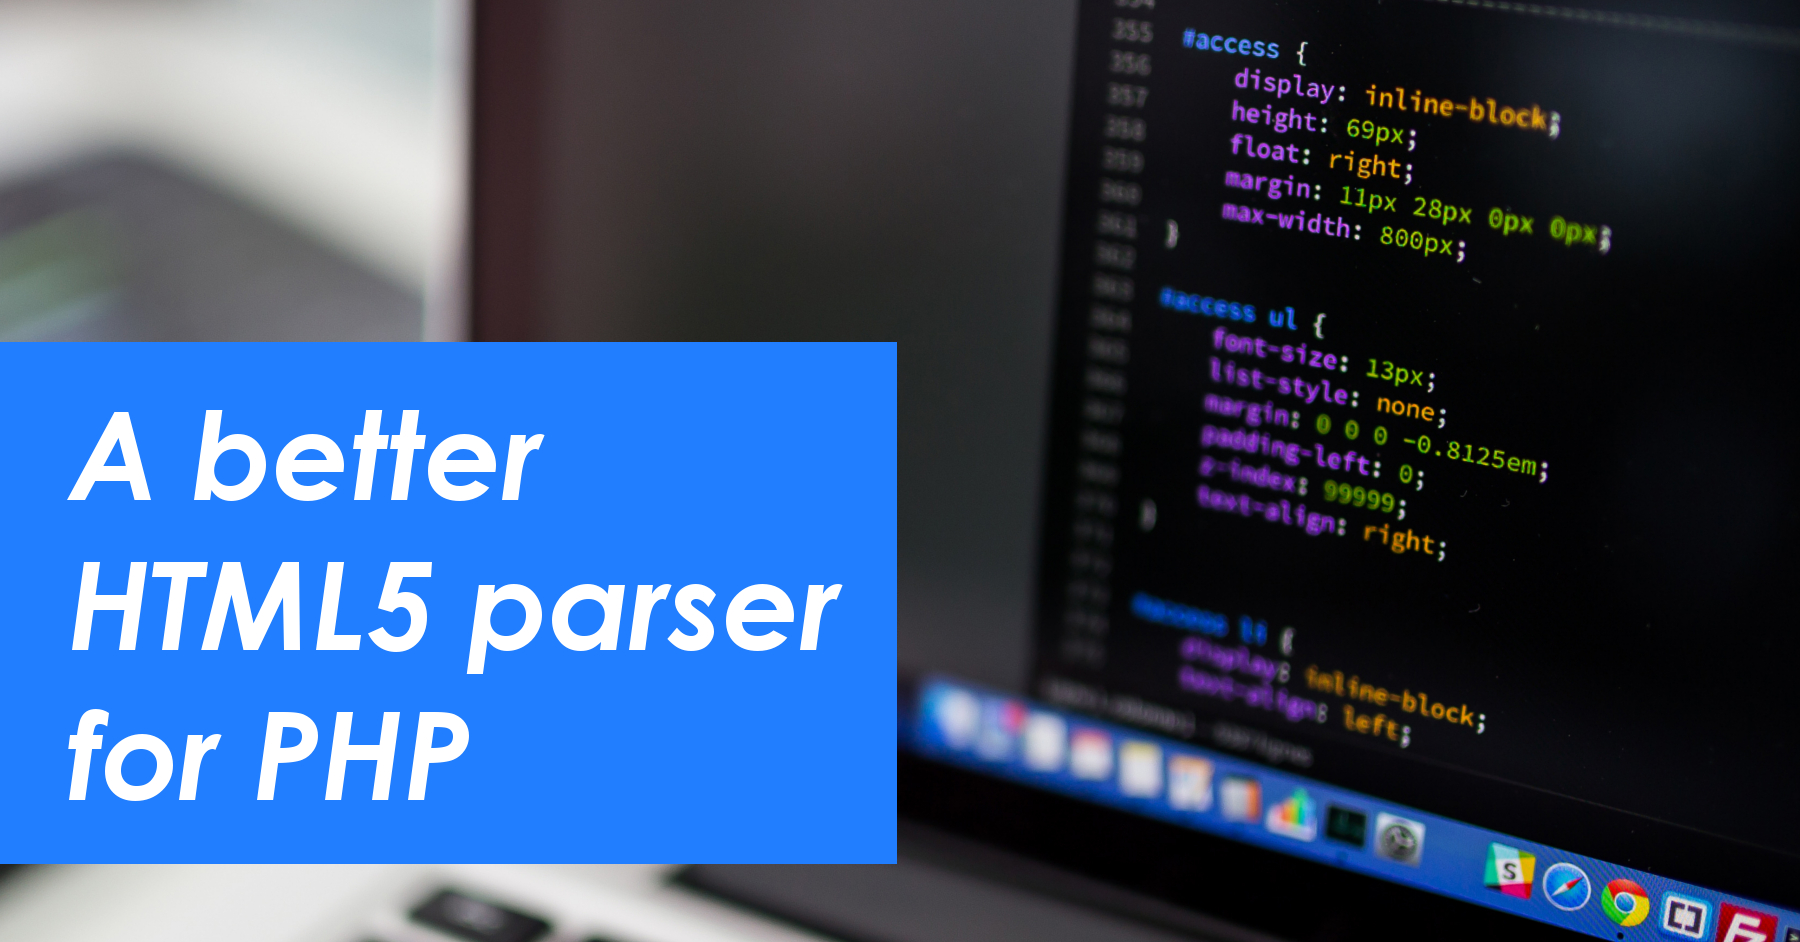 A better HTML5 parser for PHP